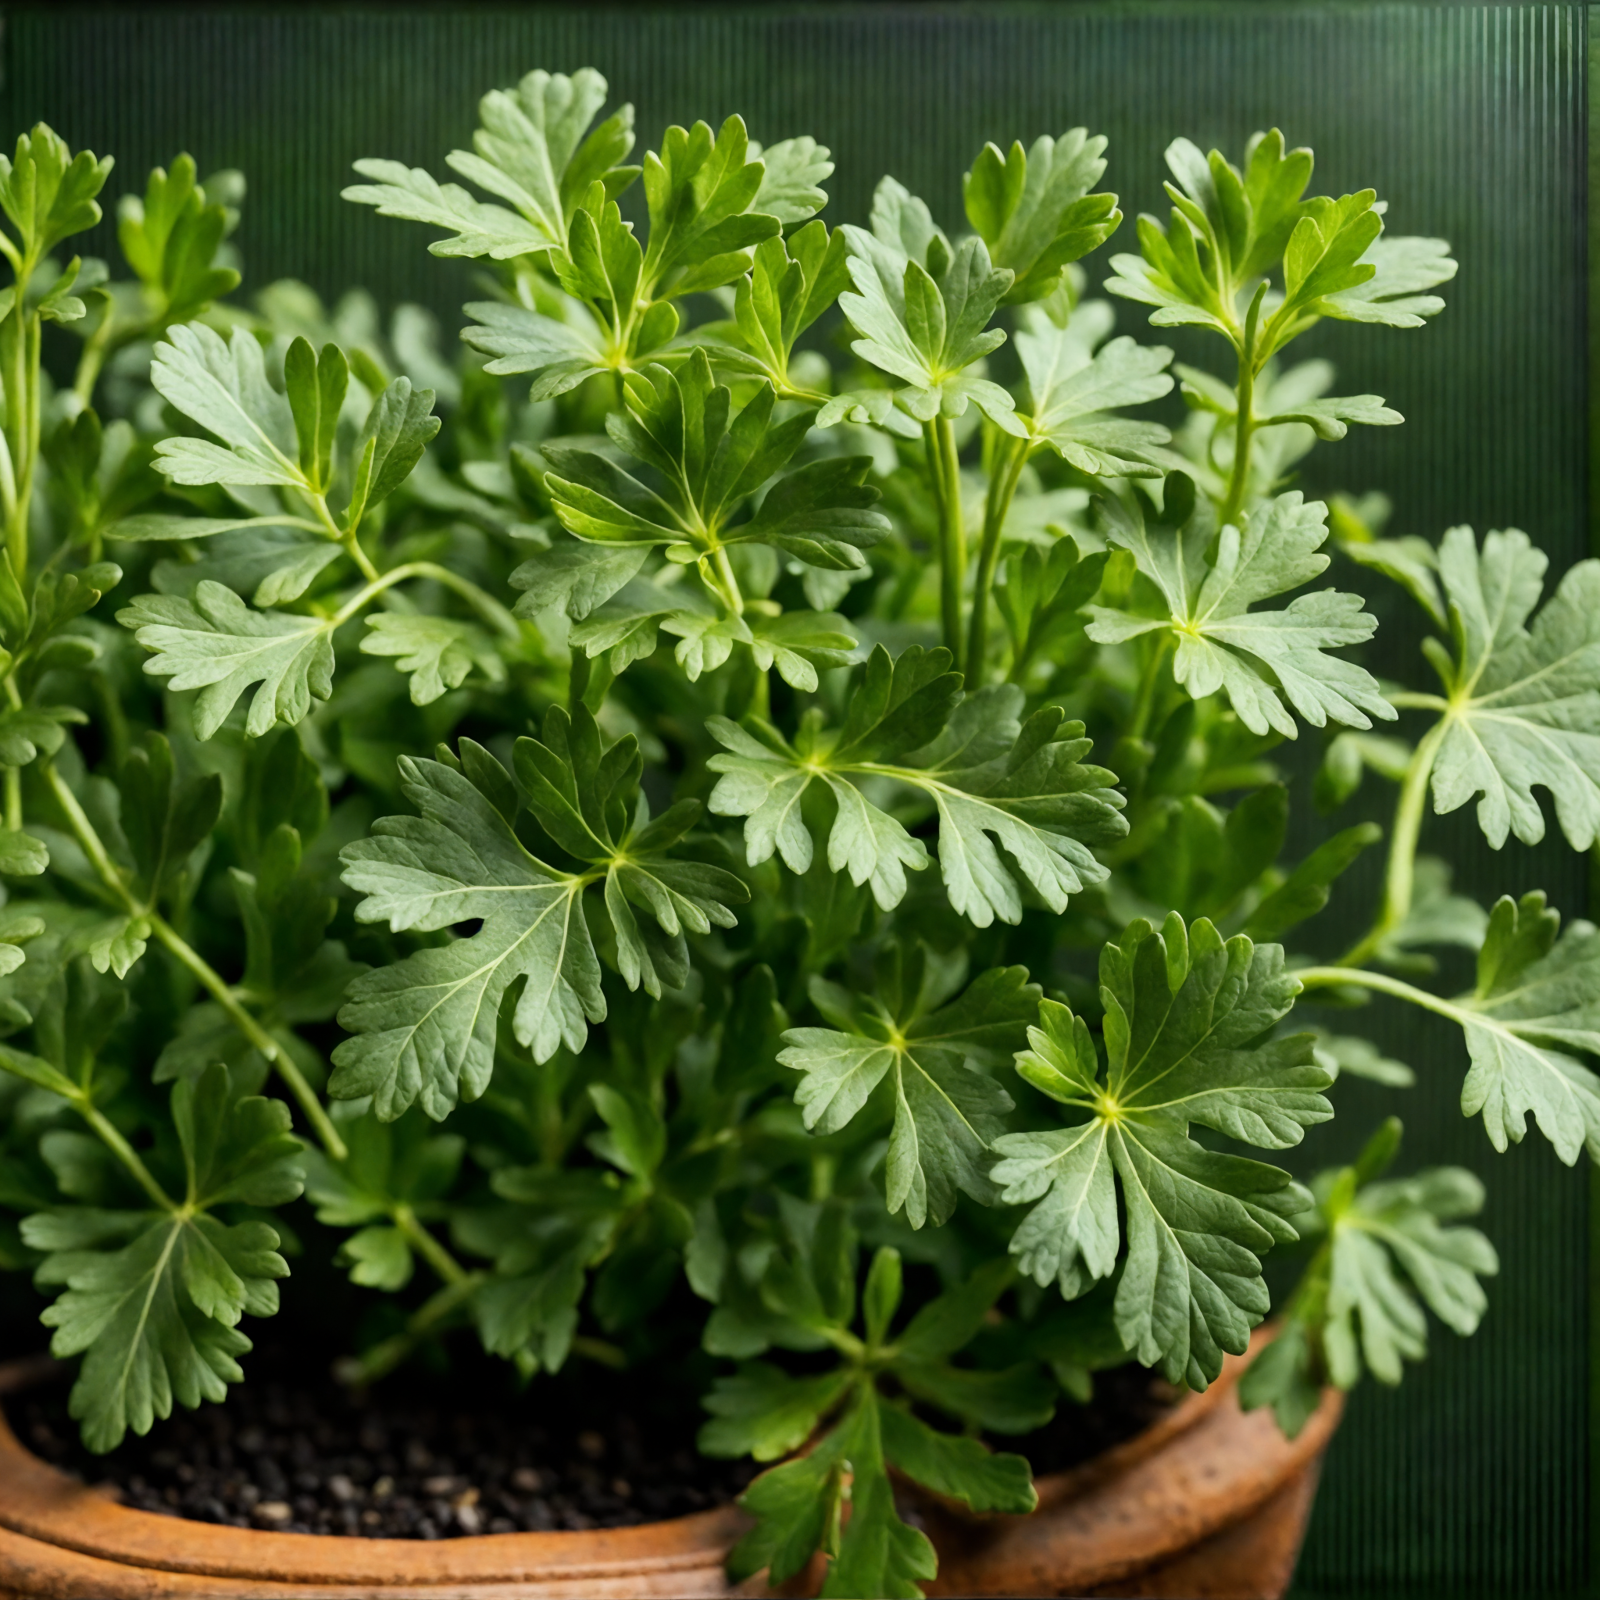 A realistic parsley (Petroselinum crispum) plant in a bowl, with a dark background and clear lighting.